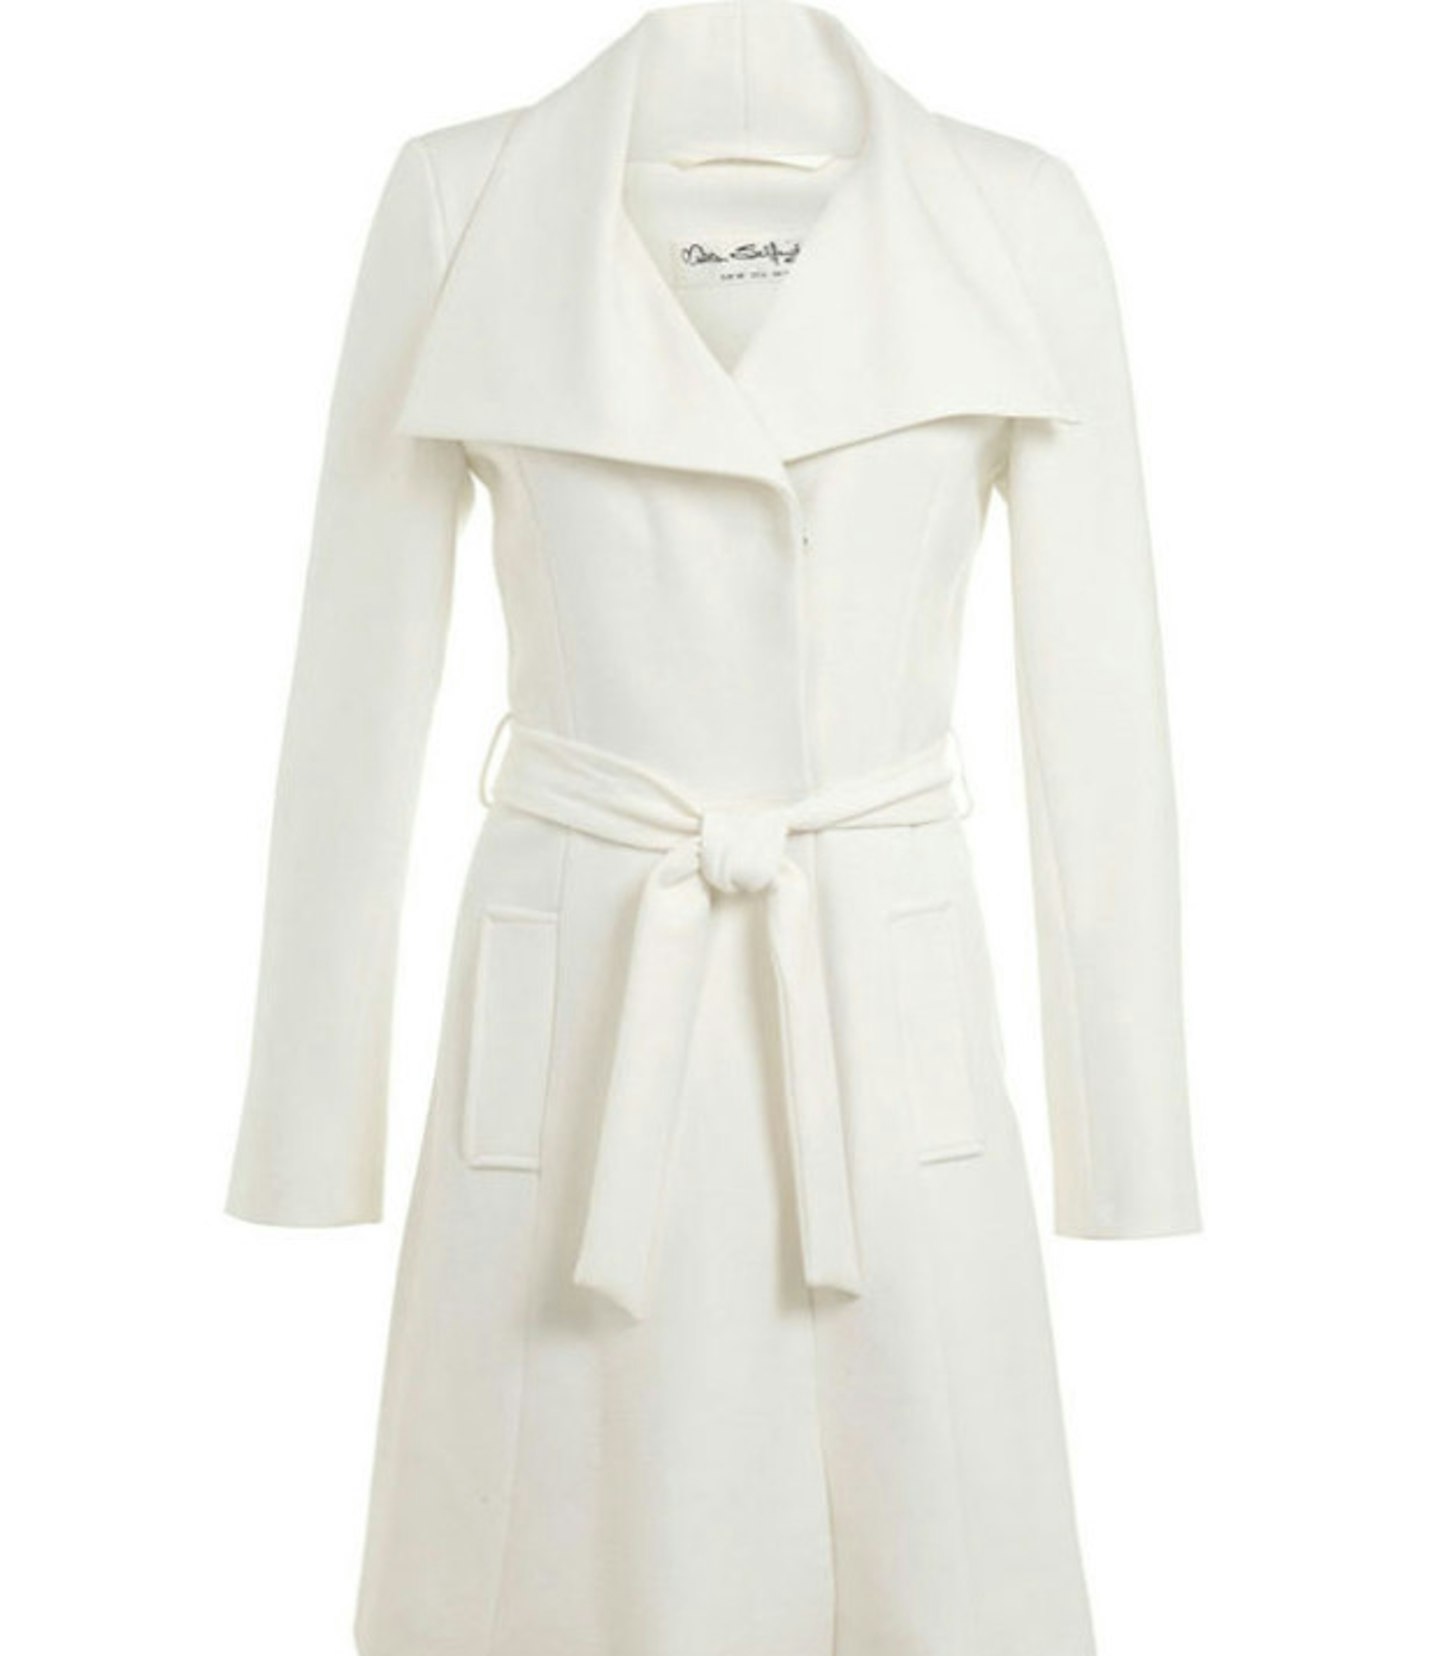 A white coat is totes alright for a wedding